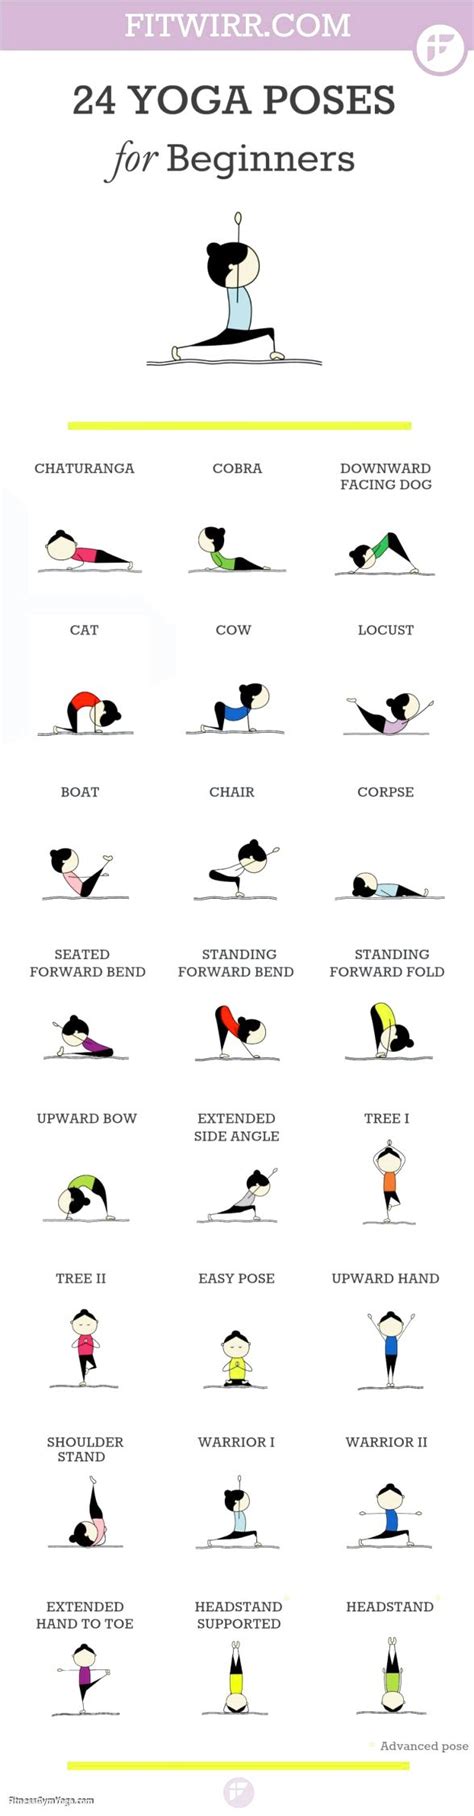 yoga poses meditation work  picture media work  picture media